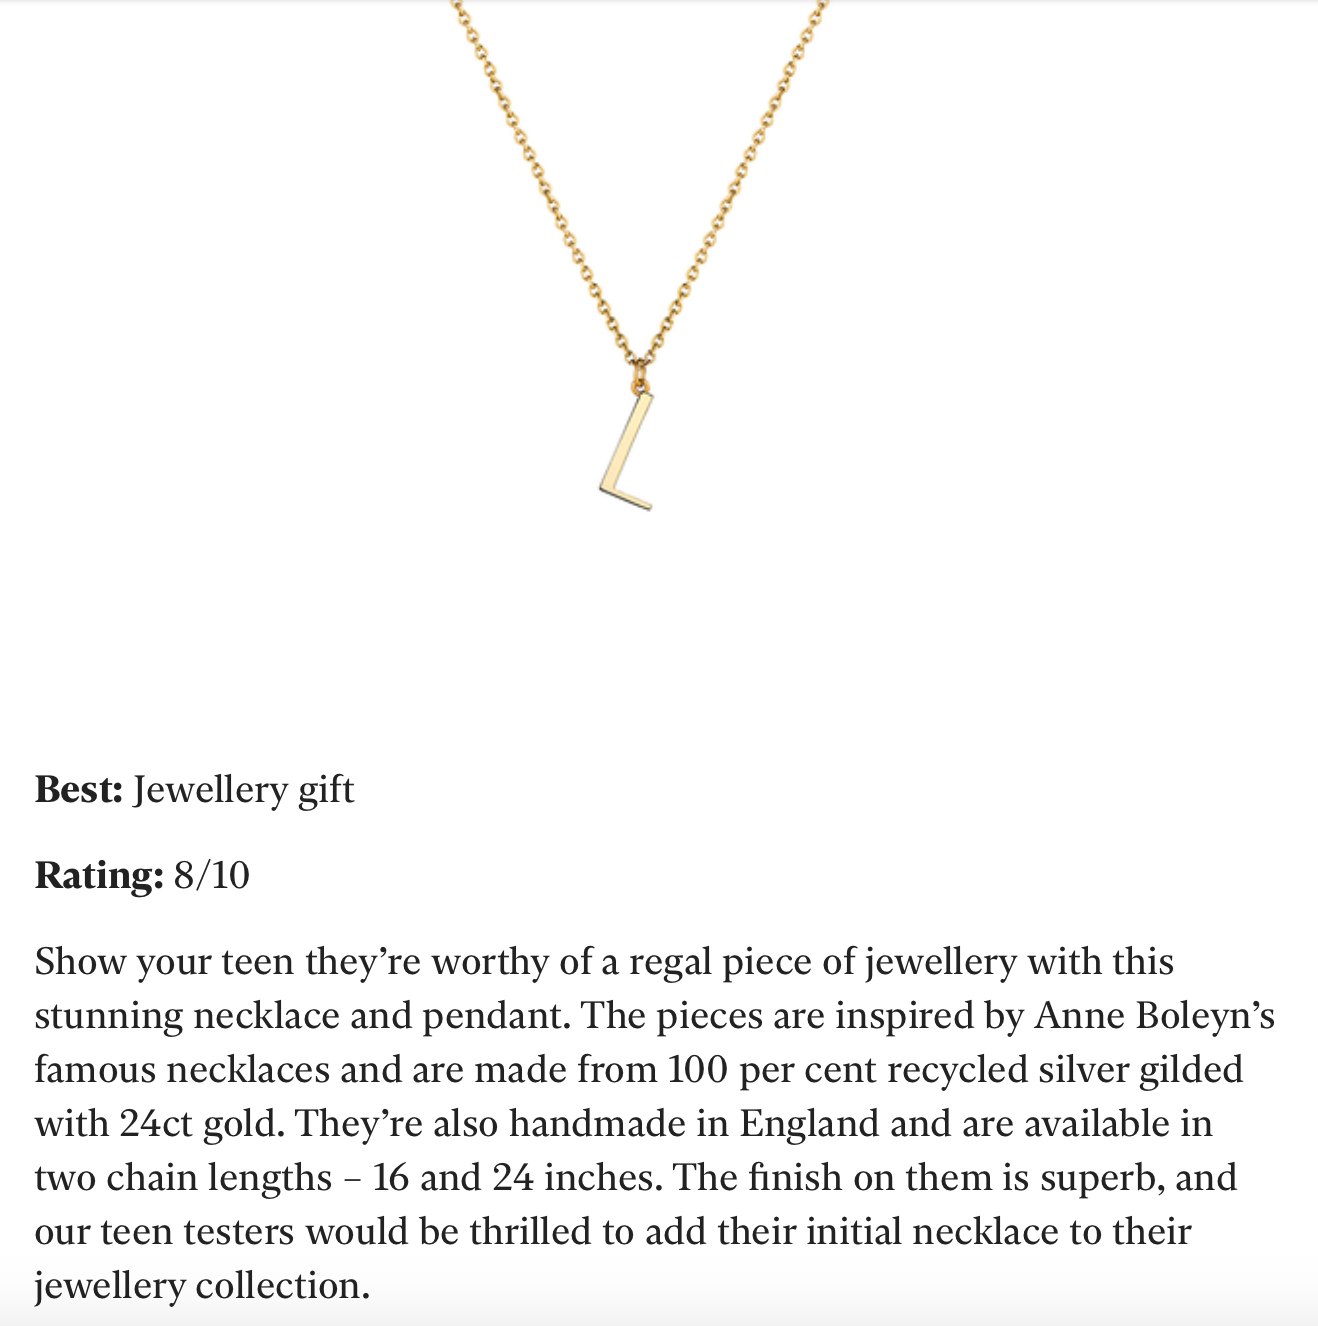 Screenshot of The Independents Gift for Teens feature that Antonia Guise's Initial Necklace we're spotlighted in